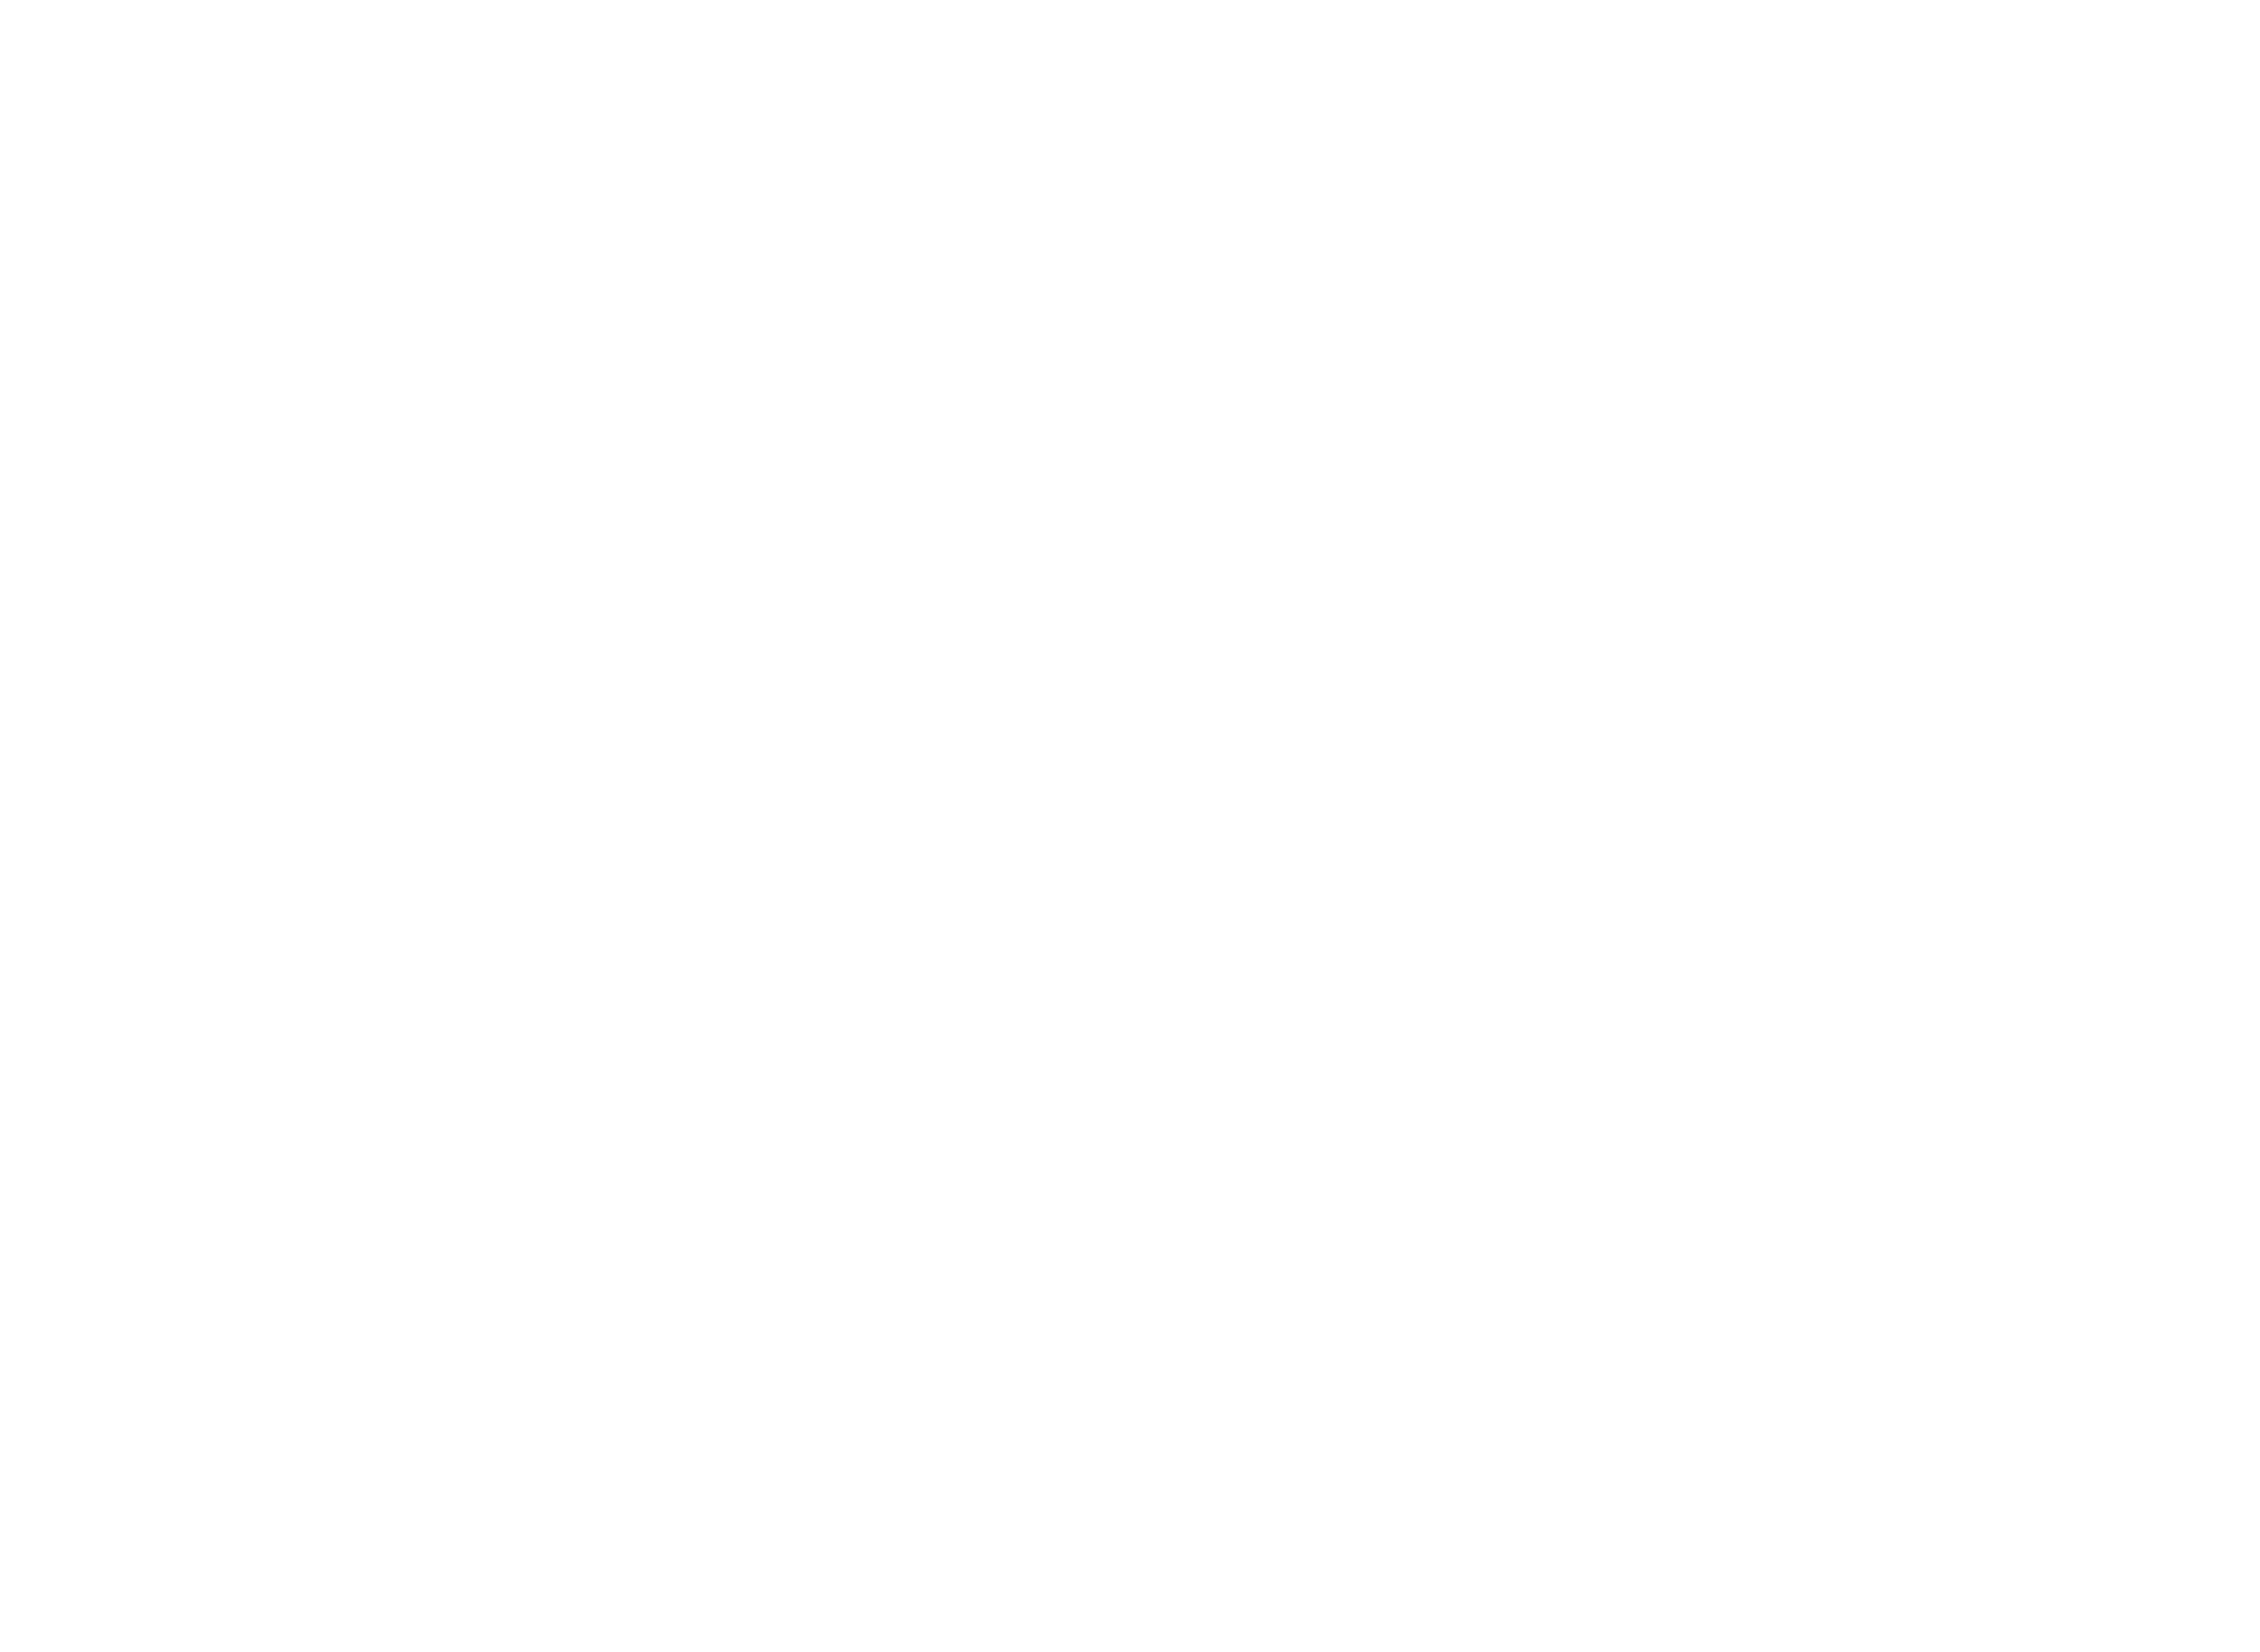 FRS Fencing: We grow better together